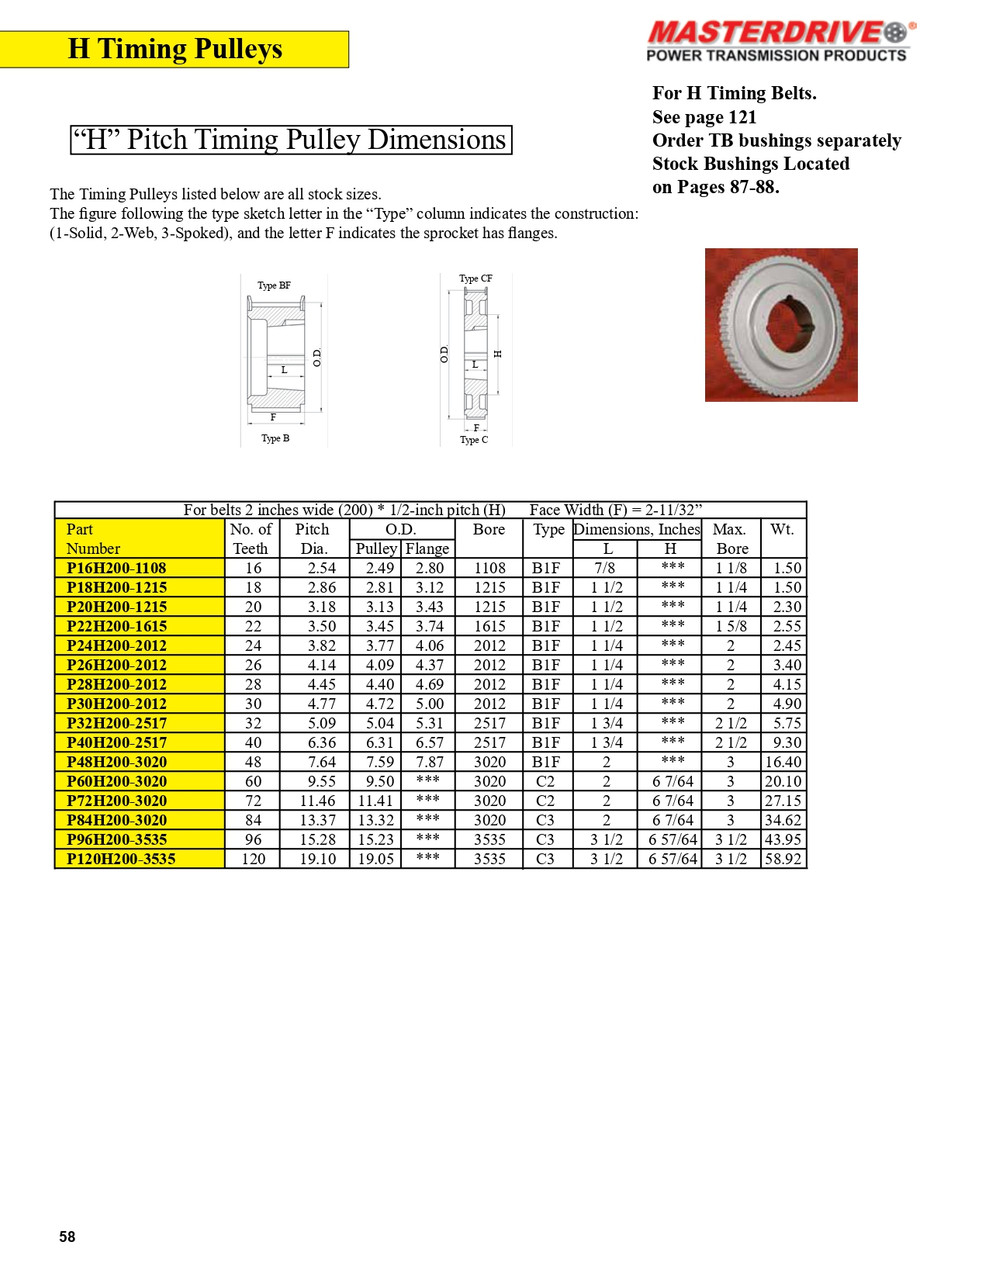 28 Tooth "H" Pitch "TB" Timing Pulley  P28H200-2012